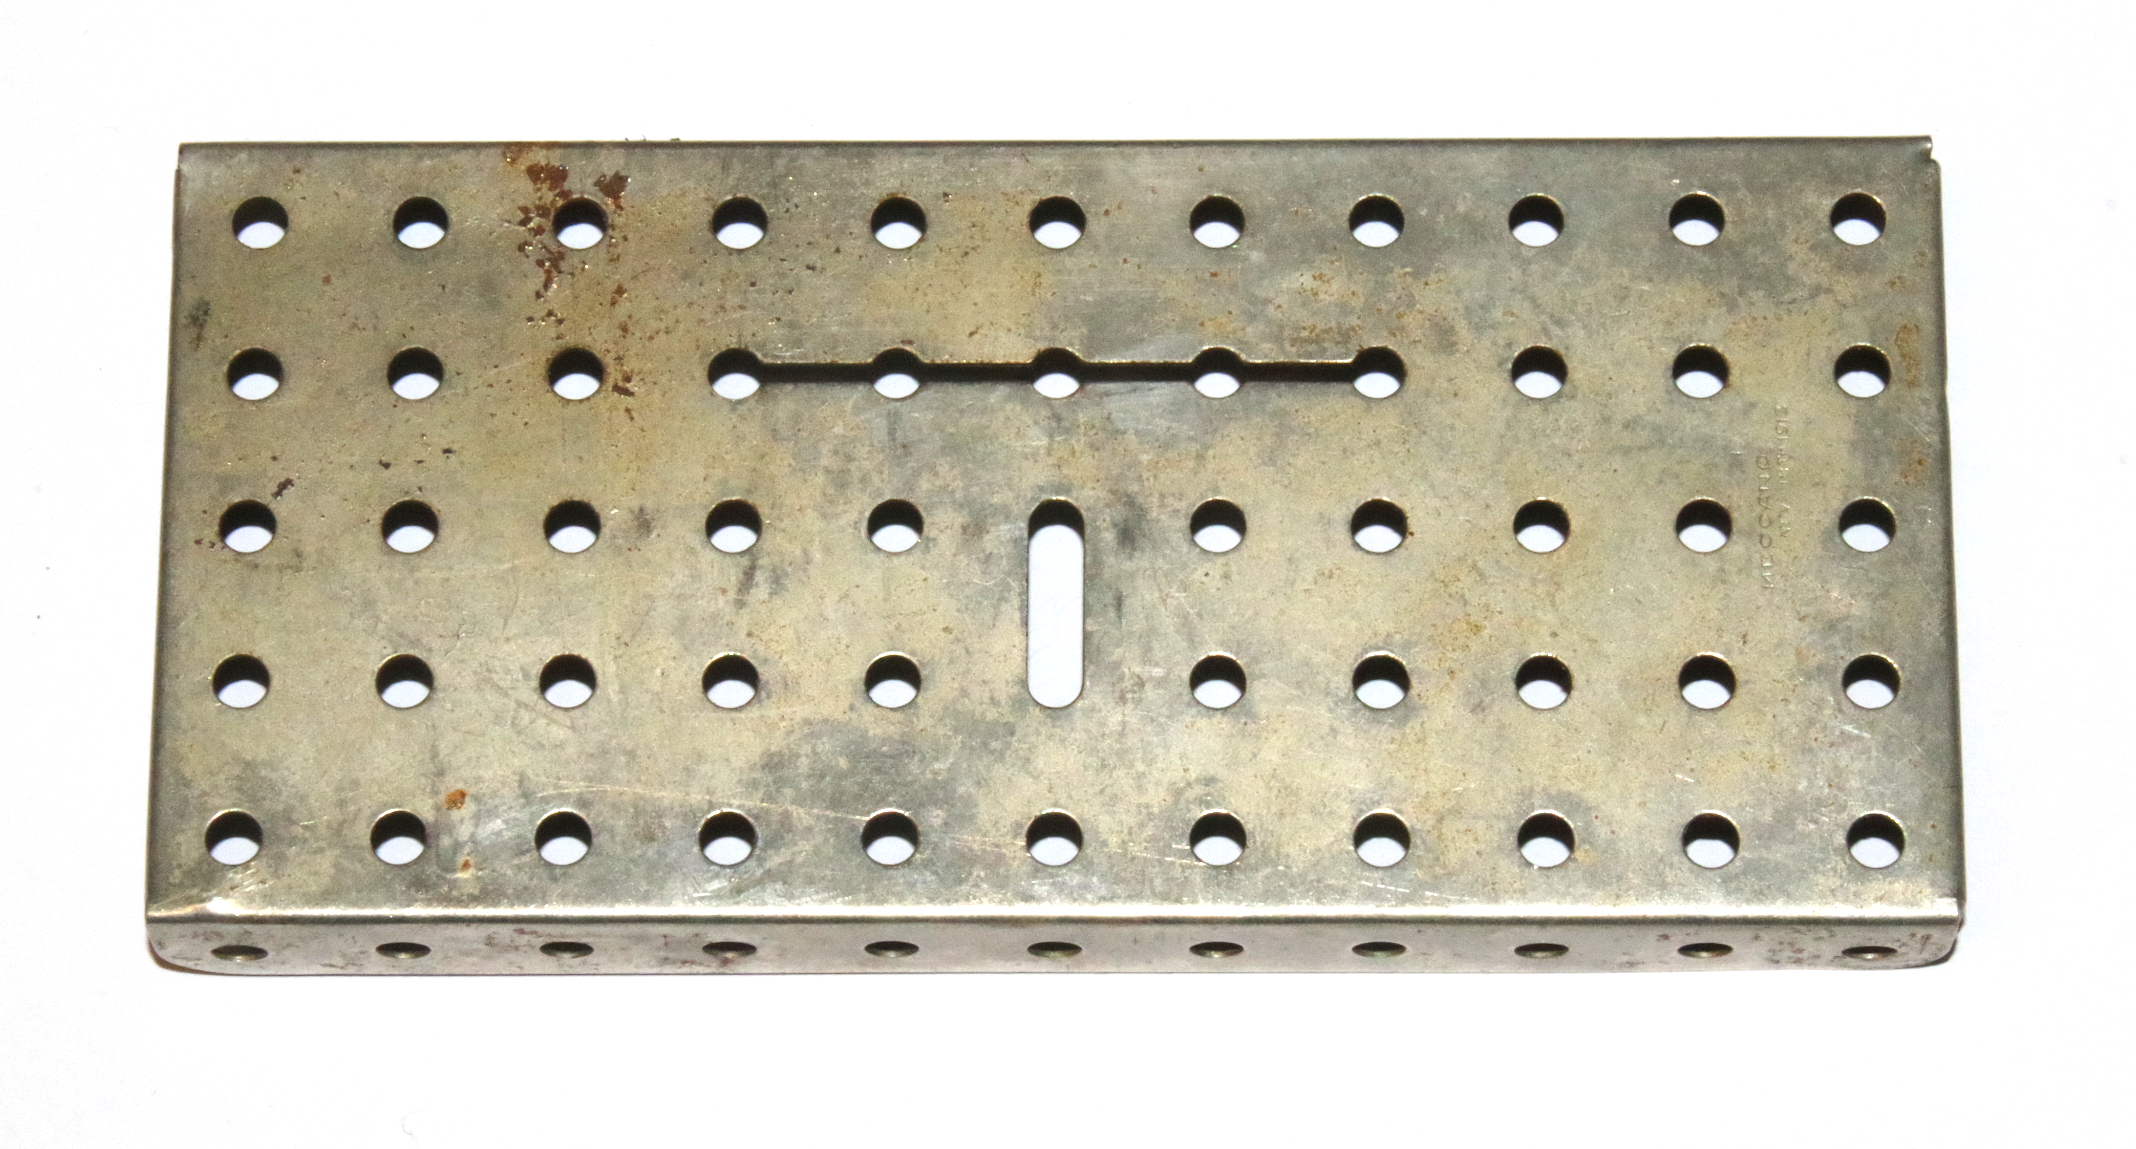 52x Flanged Plate 11x5 Hole Nickel Slotted Original